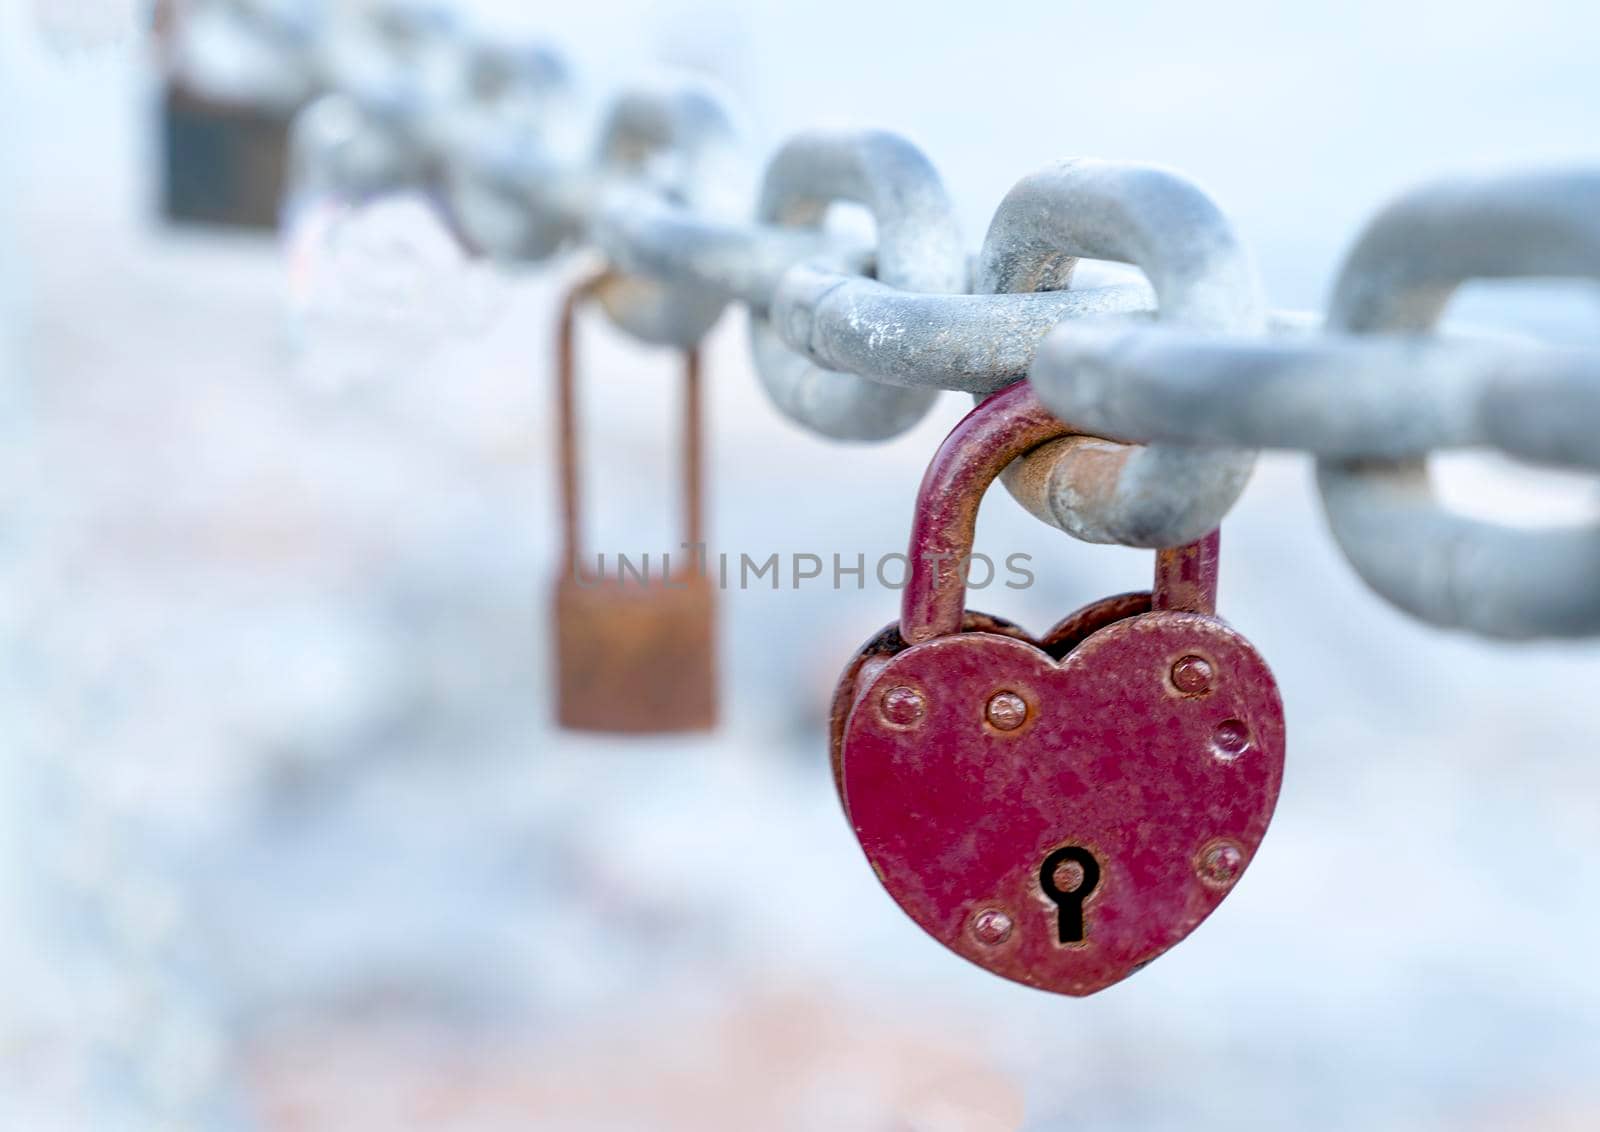 A red heart-shaped lock hangs from the bridge chain. The wedding custom is a symbol of eternal love. Close-up.